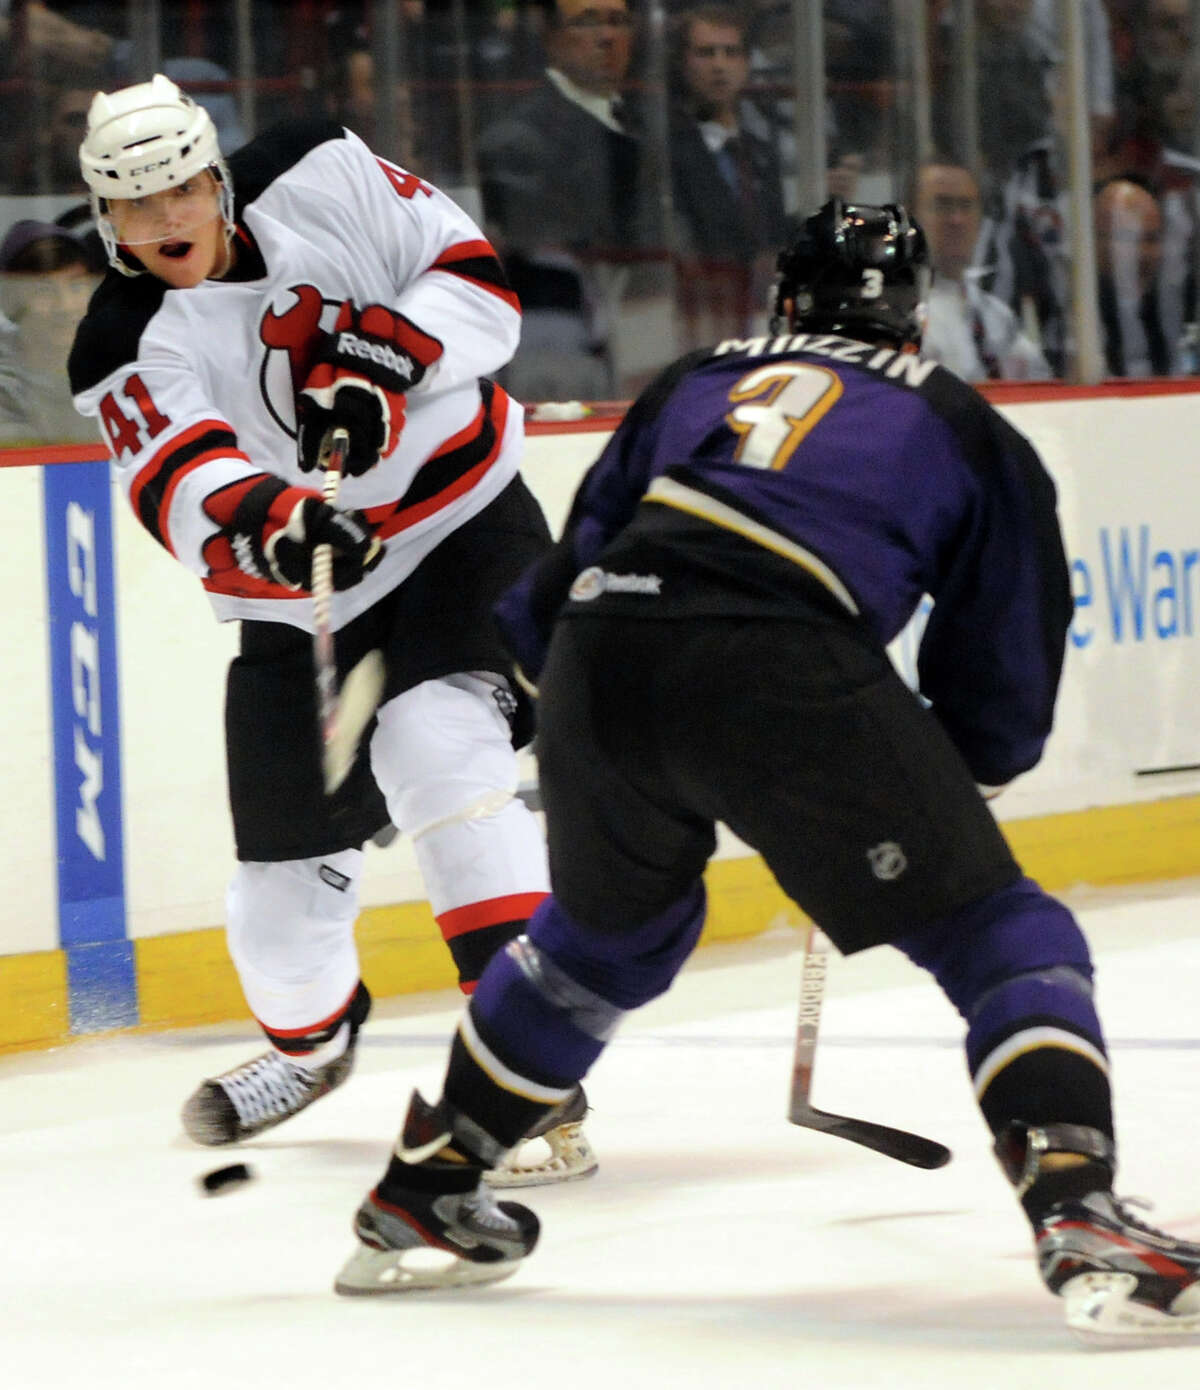 Albany Devil's Raman Hrabarenka (41), left, shoots the puck, and sets up a first-period goal, as Manchester Monarch's Jake Muzzin (3) defends during their hockey game on Saturday, Oct. 13, 2012, at Times Union Center in Albany, N.Y. (Cindy Schultz / Times Union)